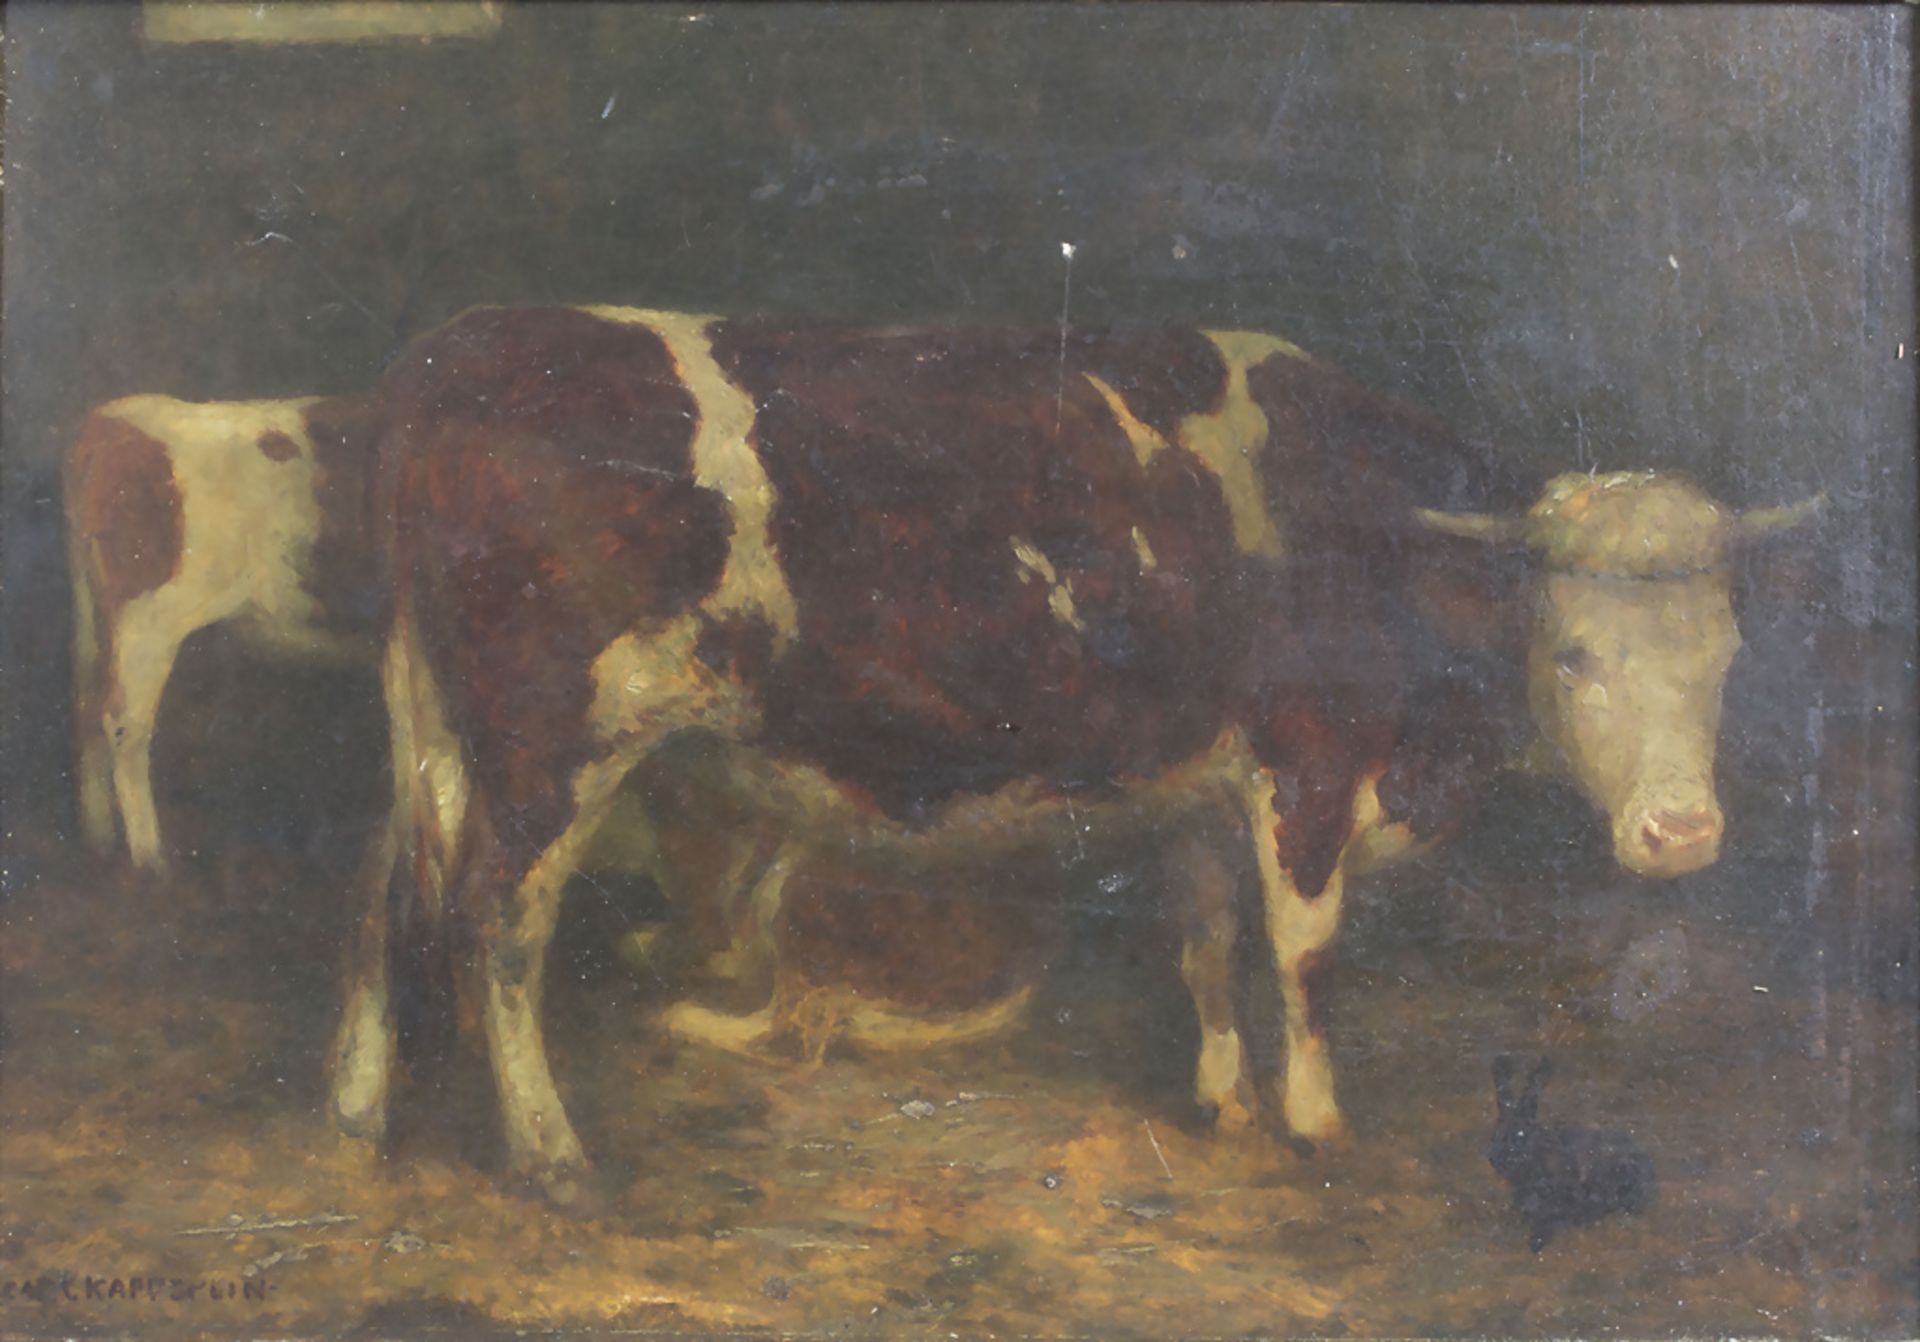 Carl Friedrich Kappstein (1869-1933), 'Im Kuhstall' / 'In a cowshed', um 1900